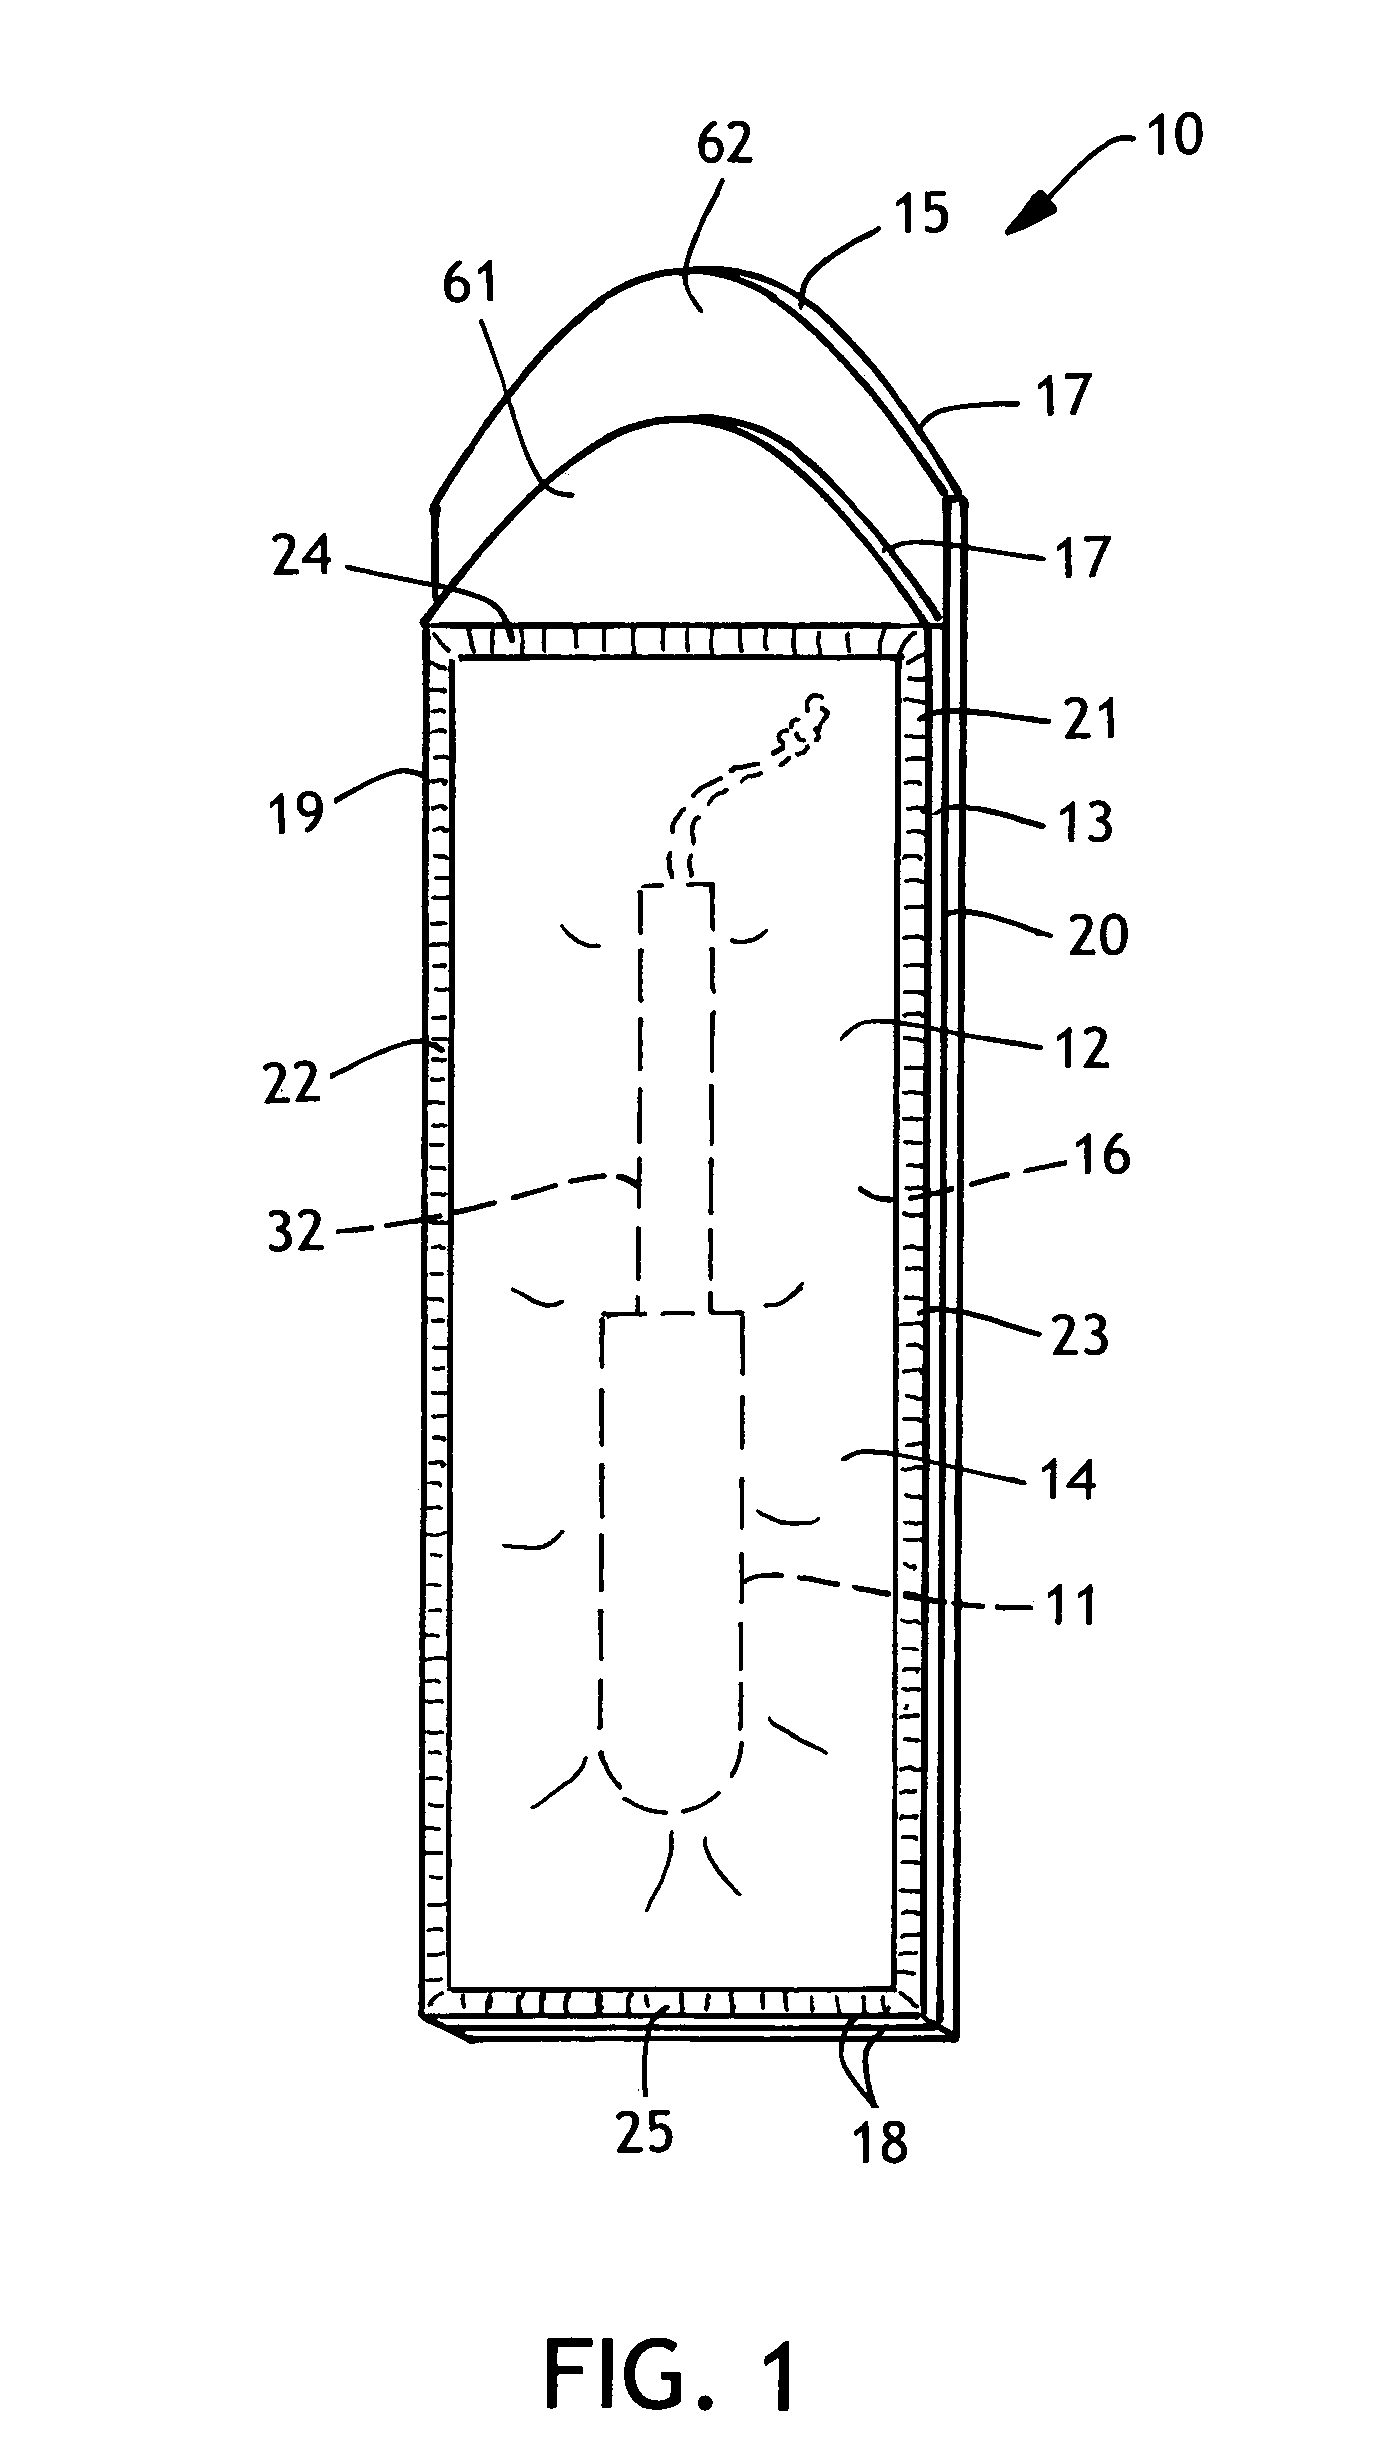 Packaged tampon and applicator assembly